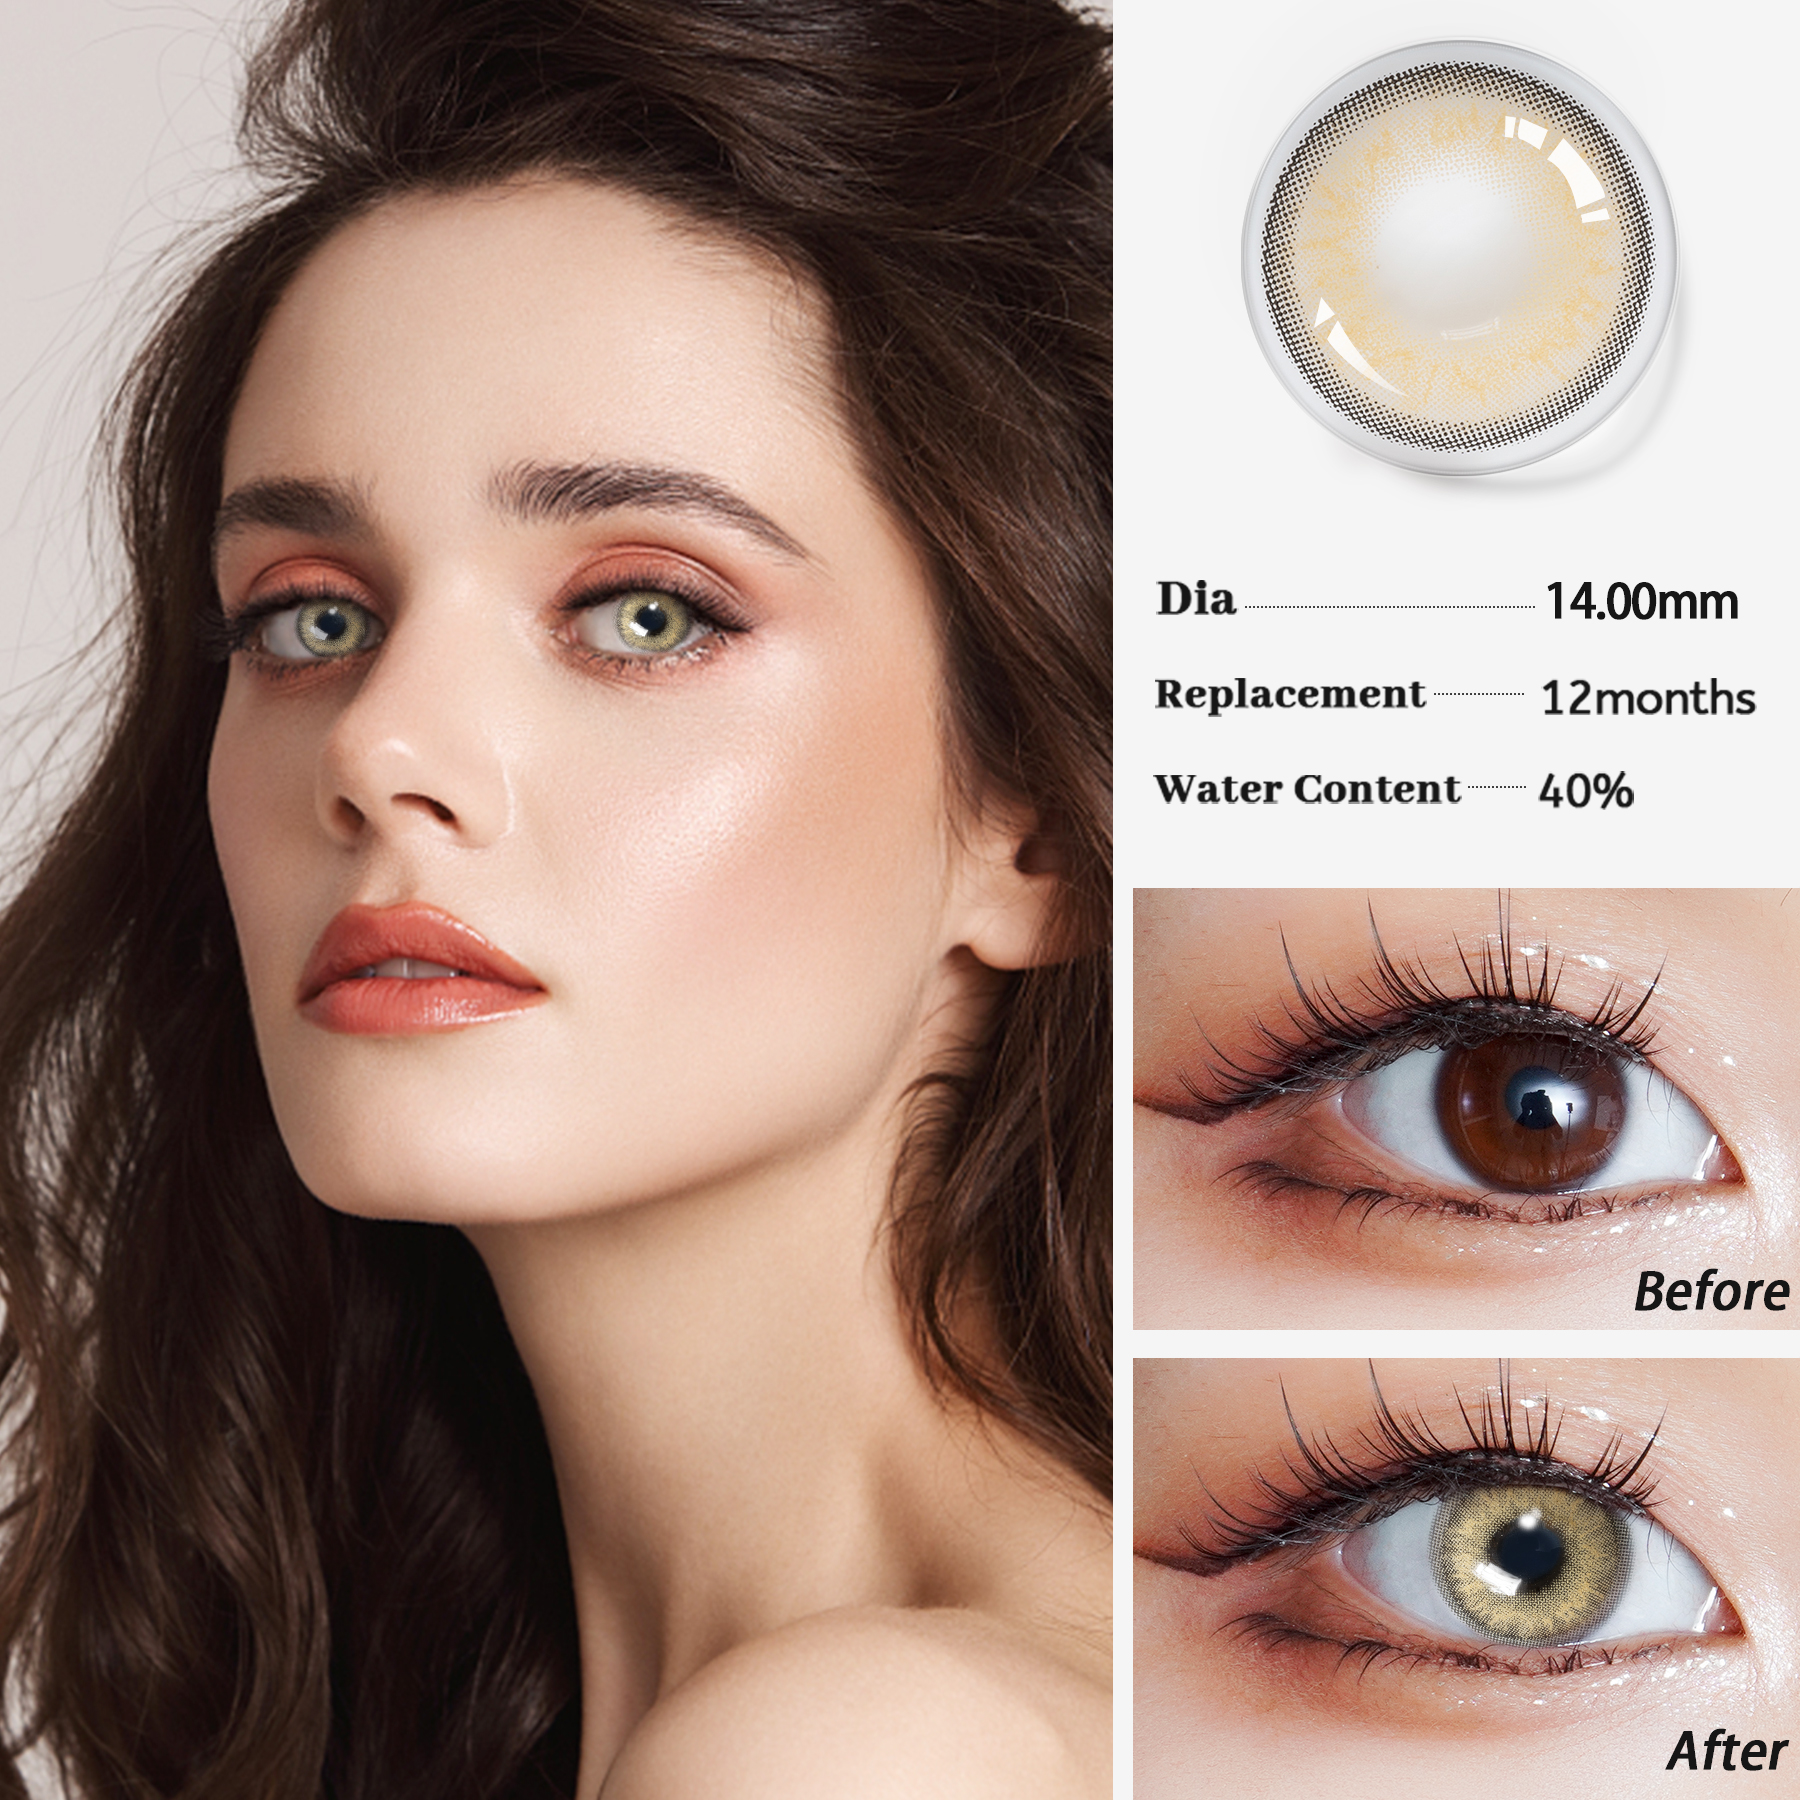 HIMALAYA Oem Private Label Fresh Looking Colour Eye Contact Lenses For Cosmetic cheap prescription colored contacts